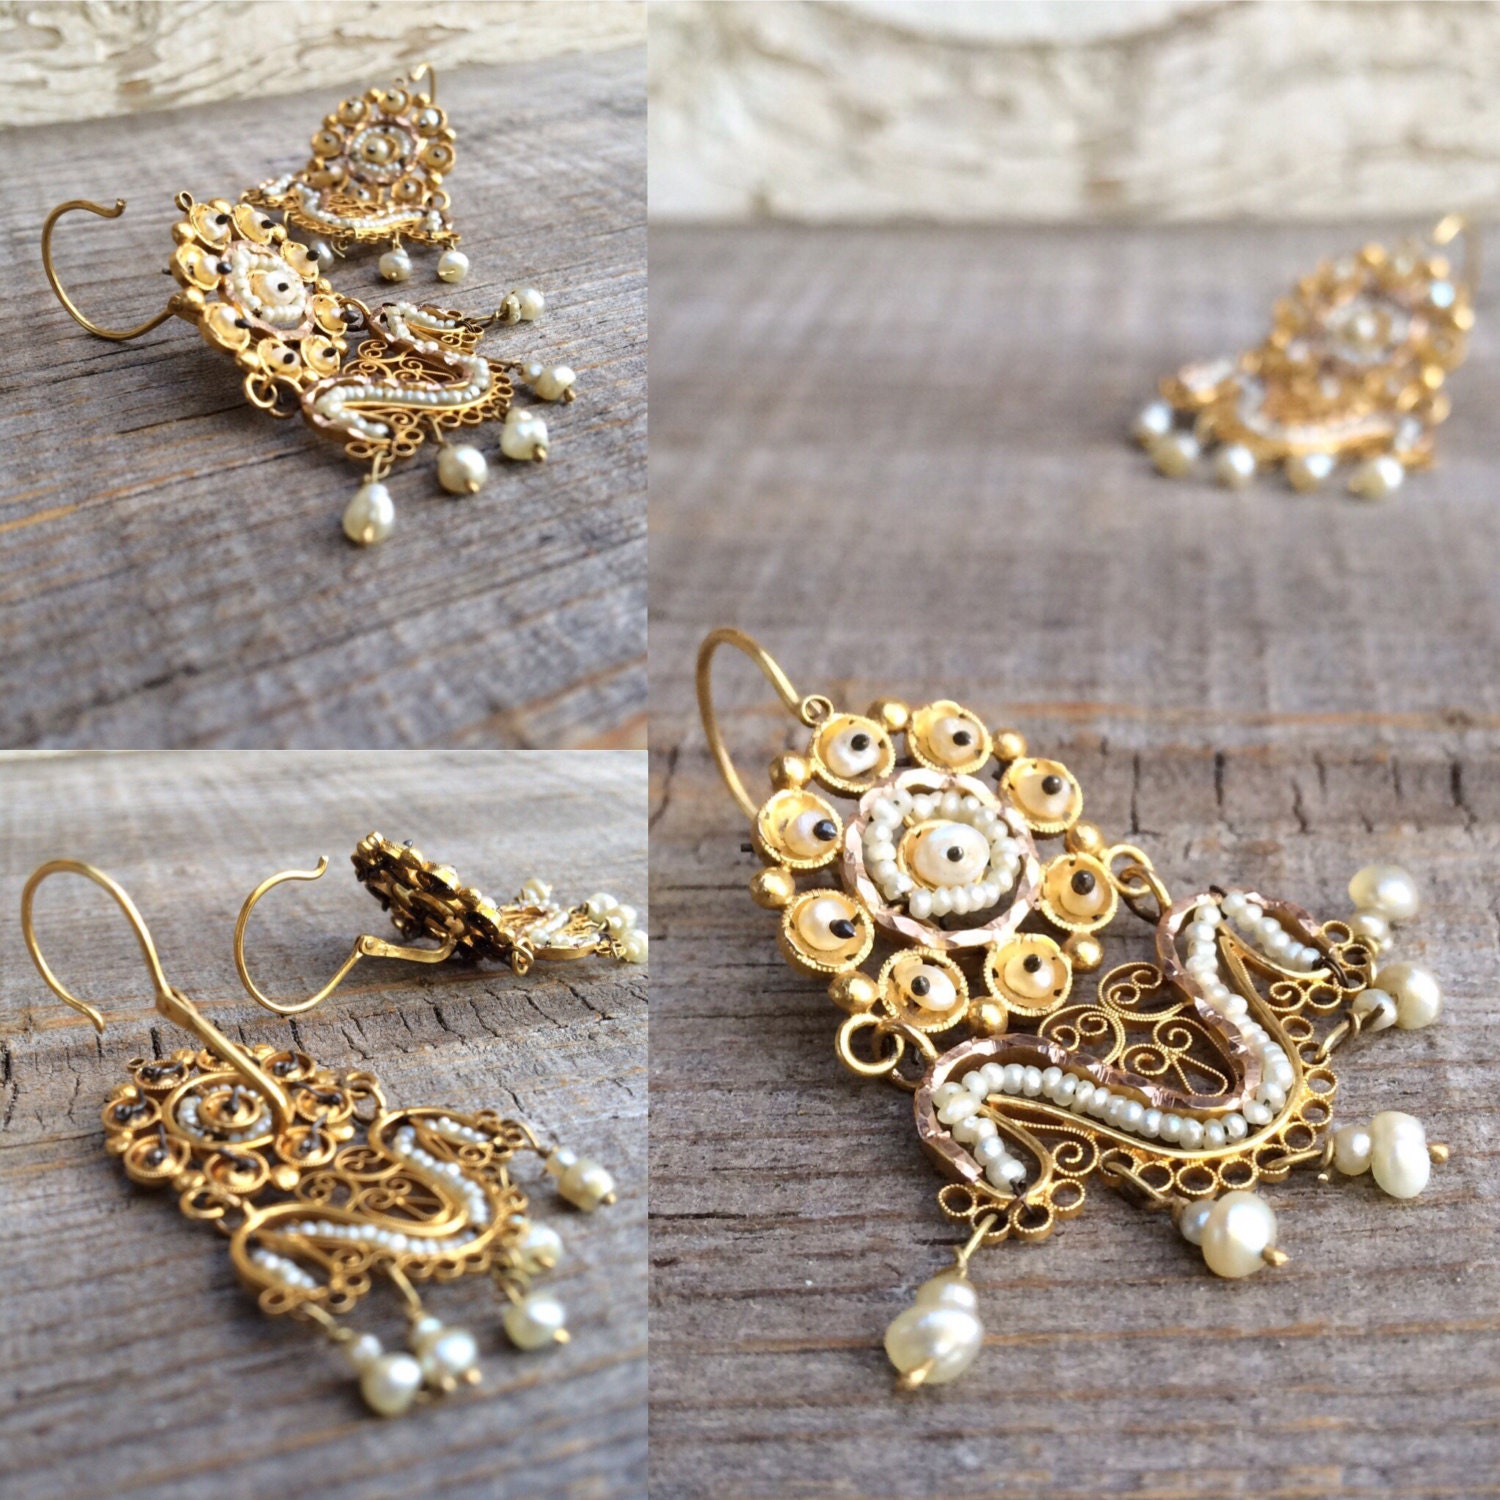 Earrings of mexican silver in filigree with flowers, silver and gold–  Mexiarts